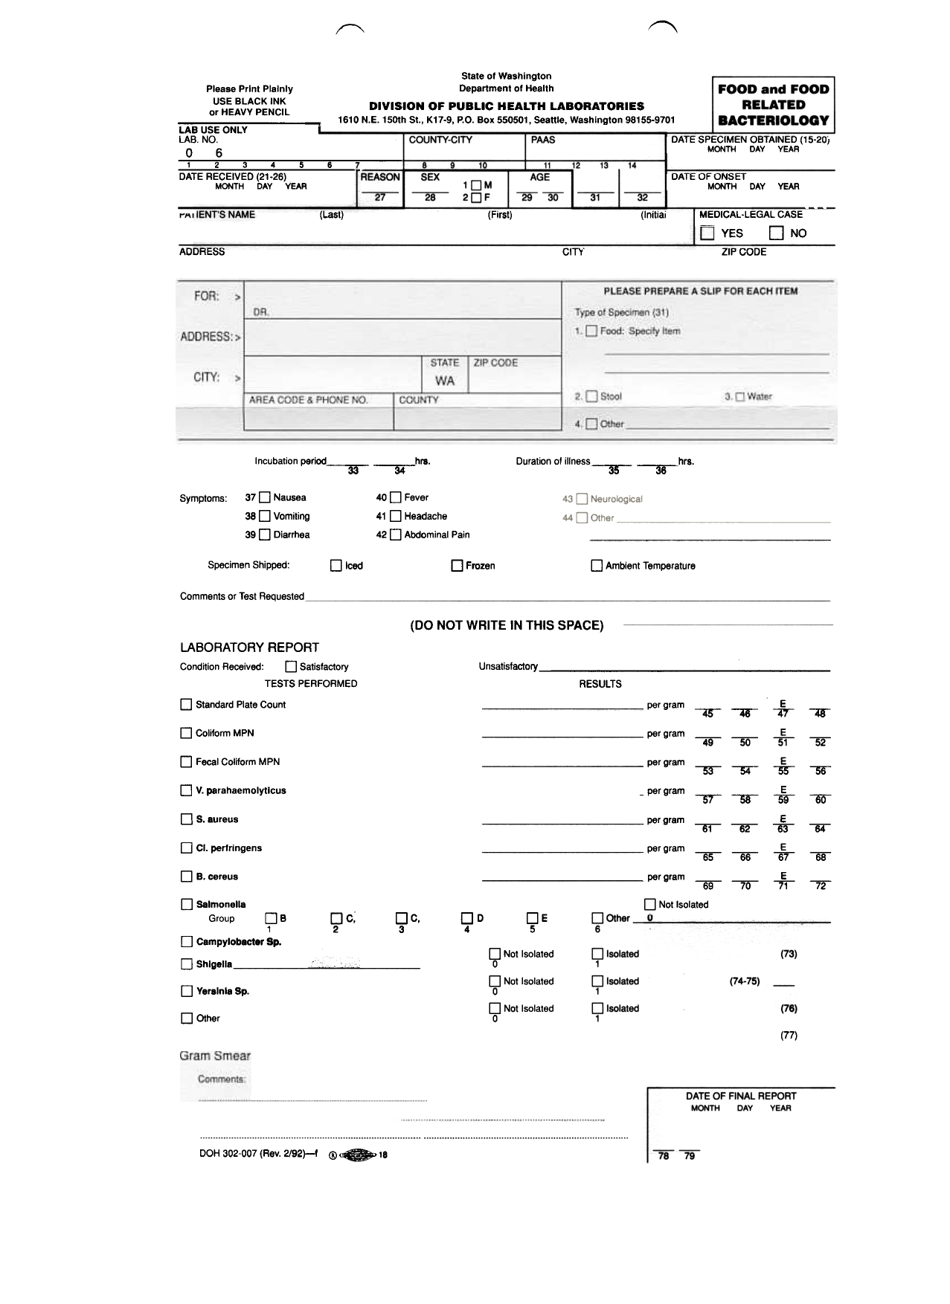 DOH Form 302-007 Food and Food Related Bacteriology - Washington, Page 1